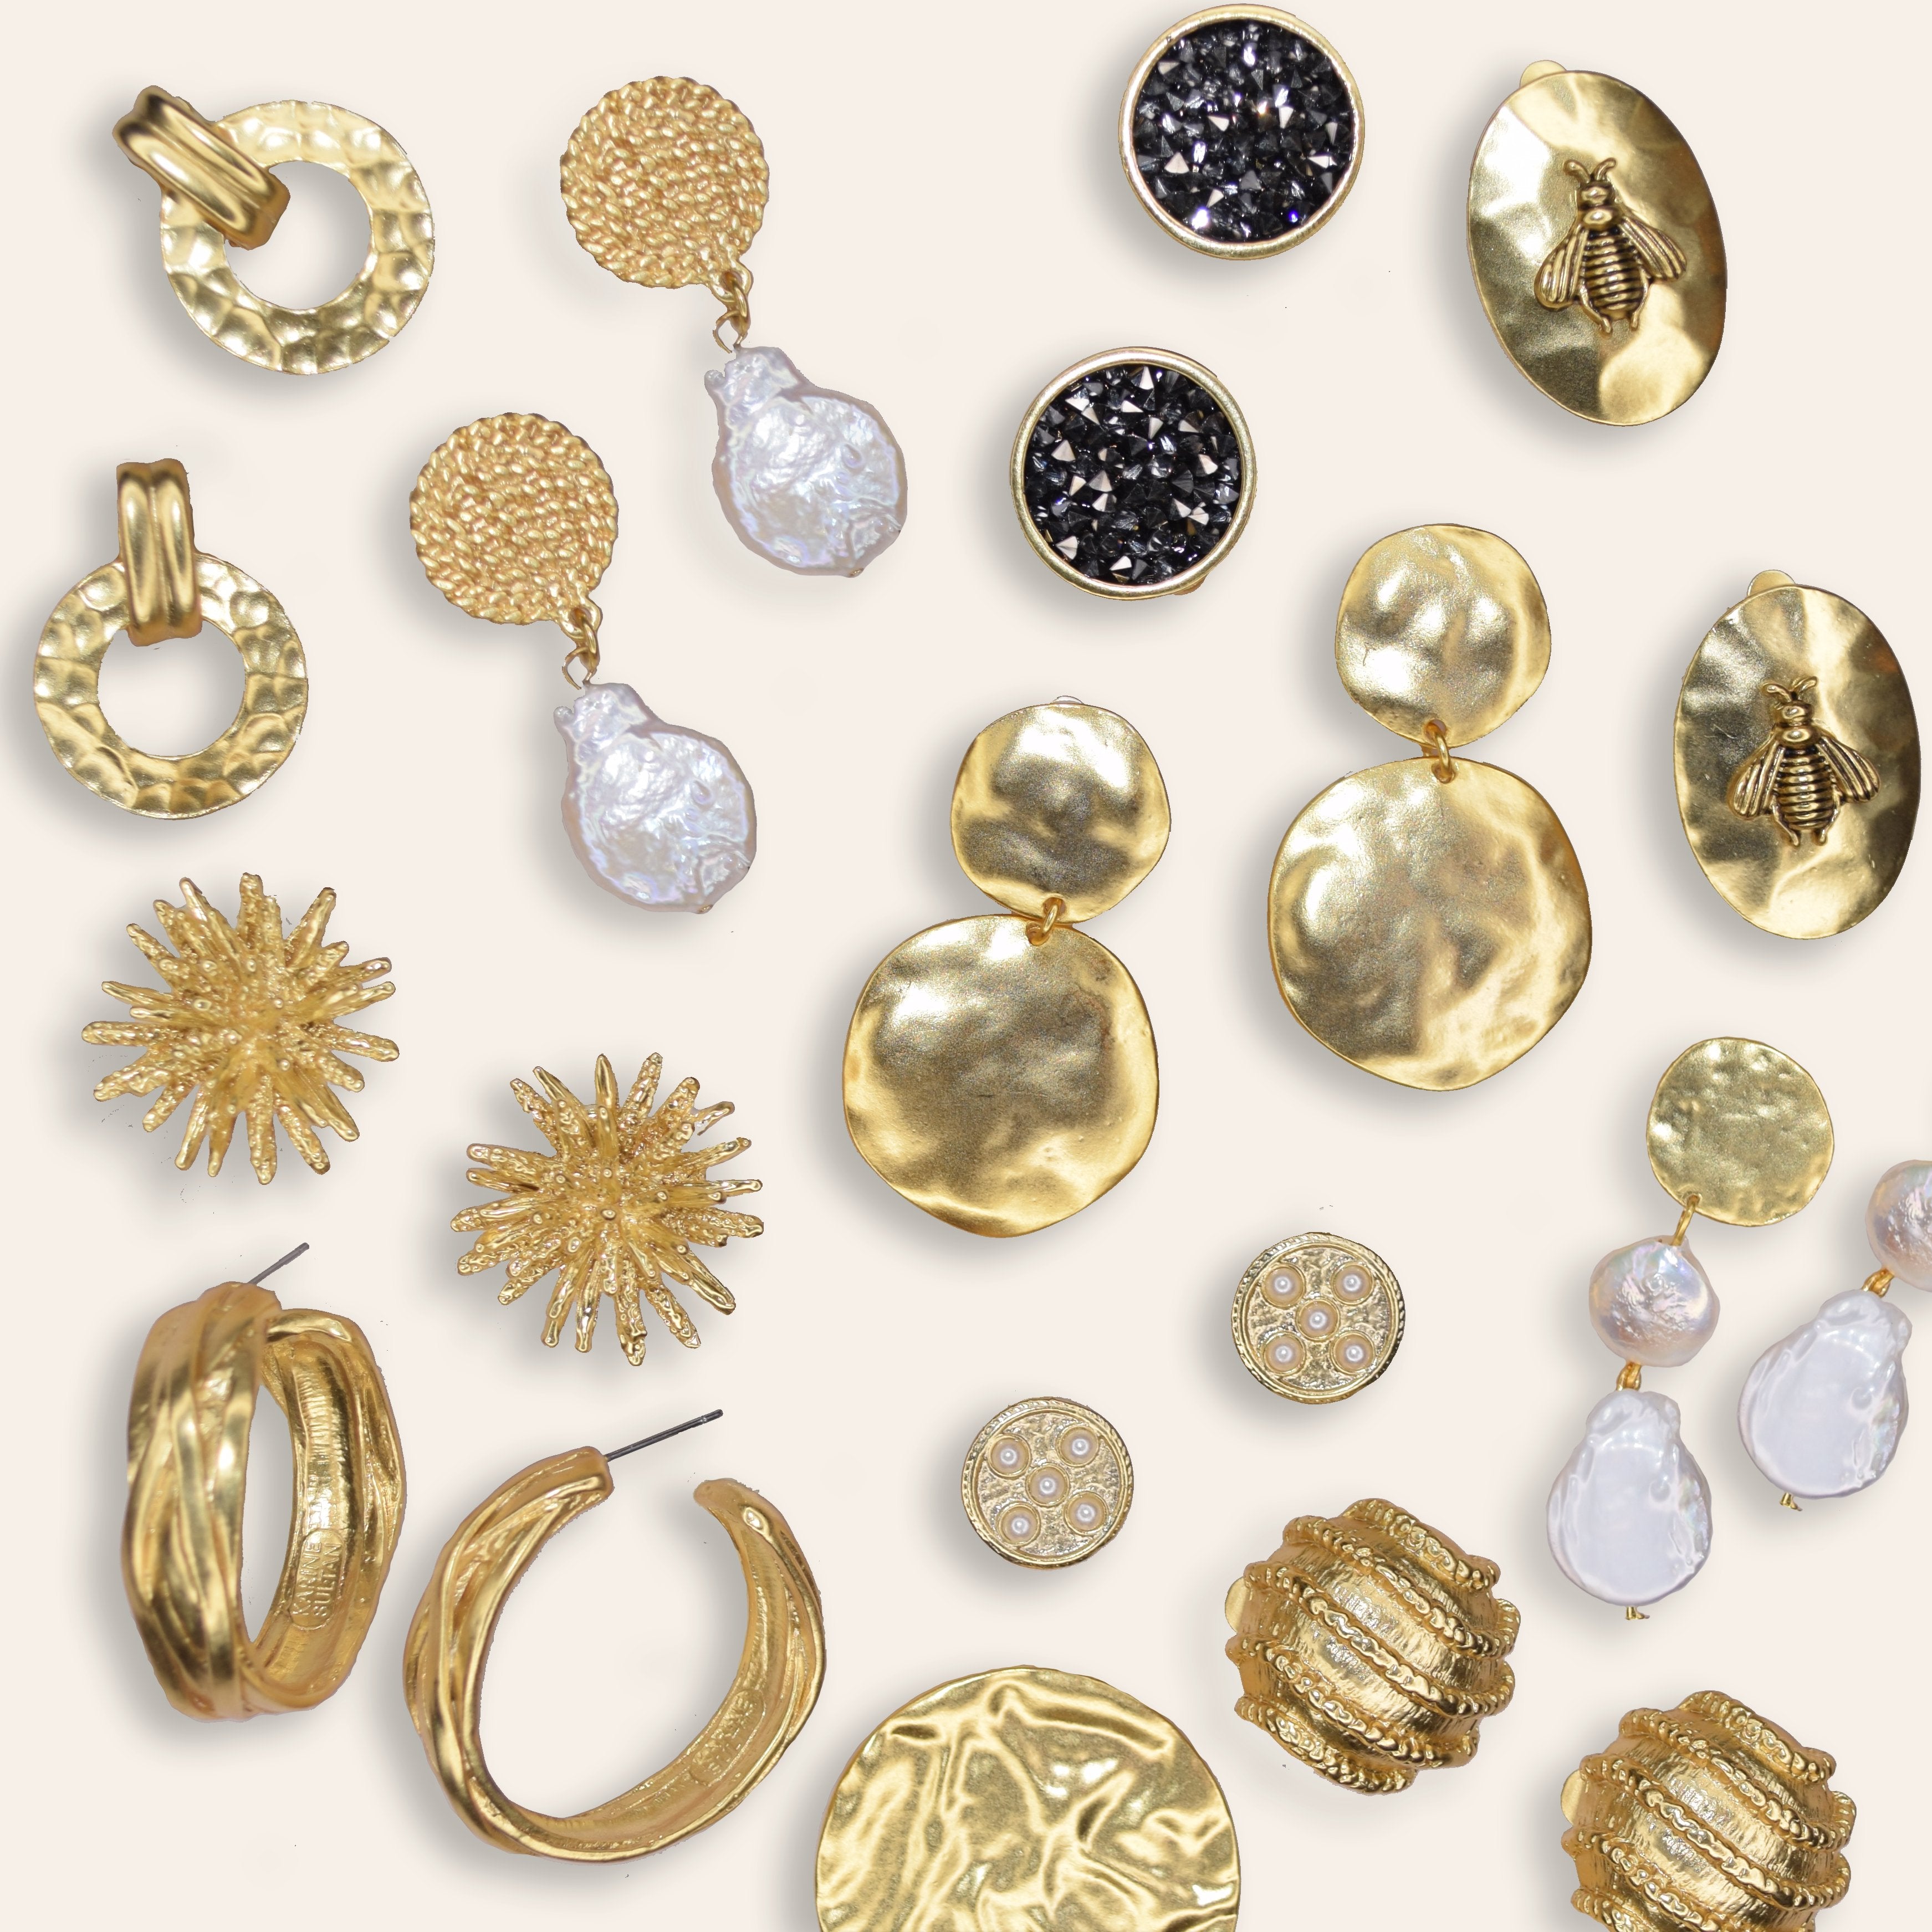 Shop Stunning Fashion Earrings for Every Occasion